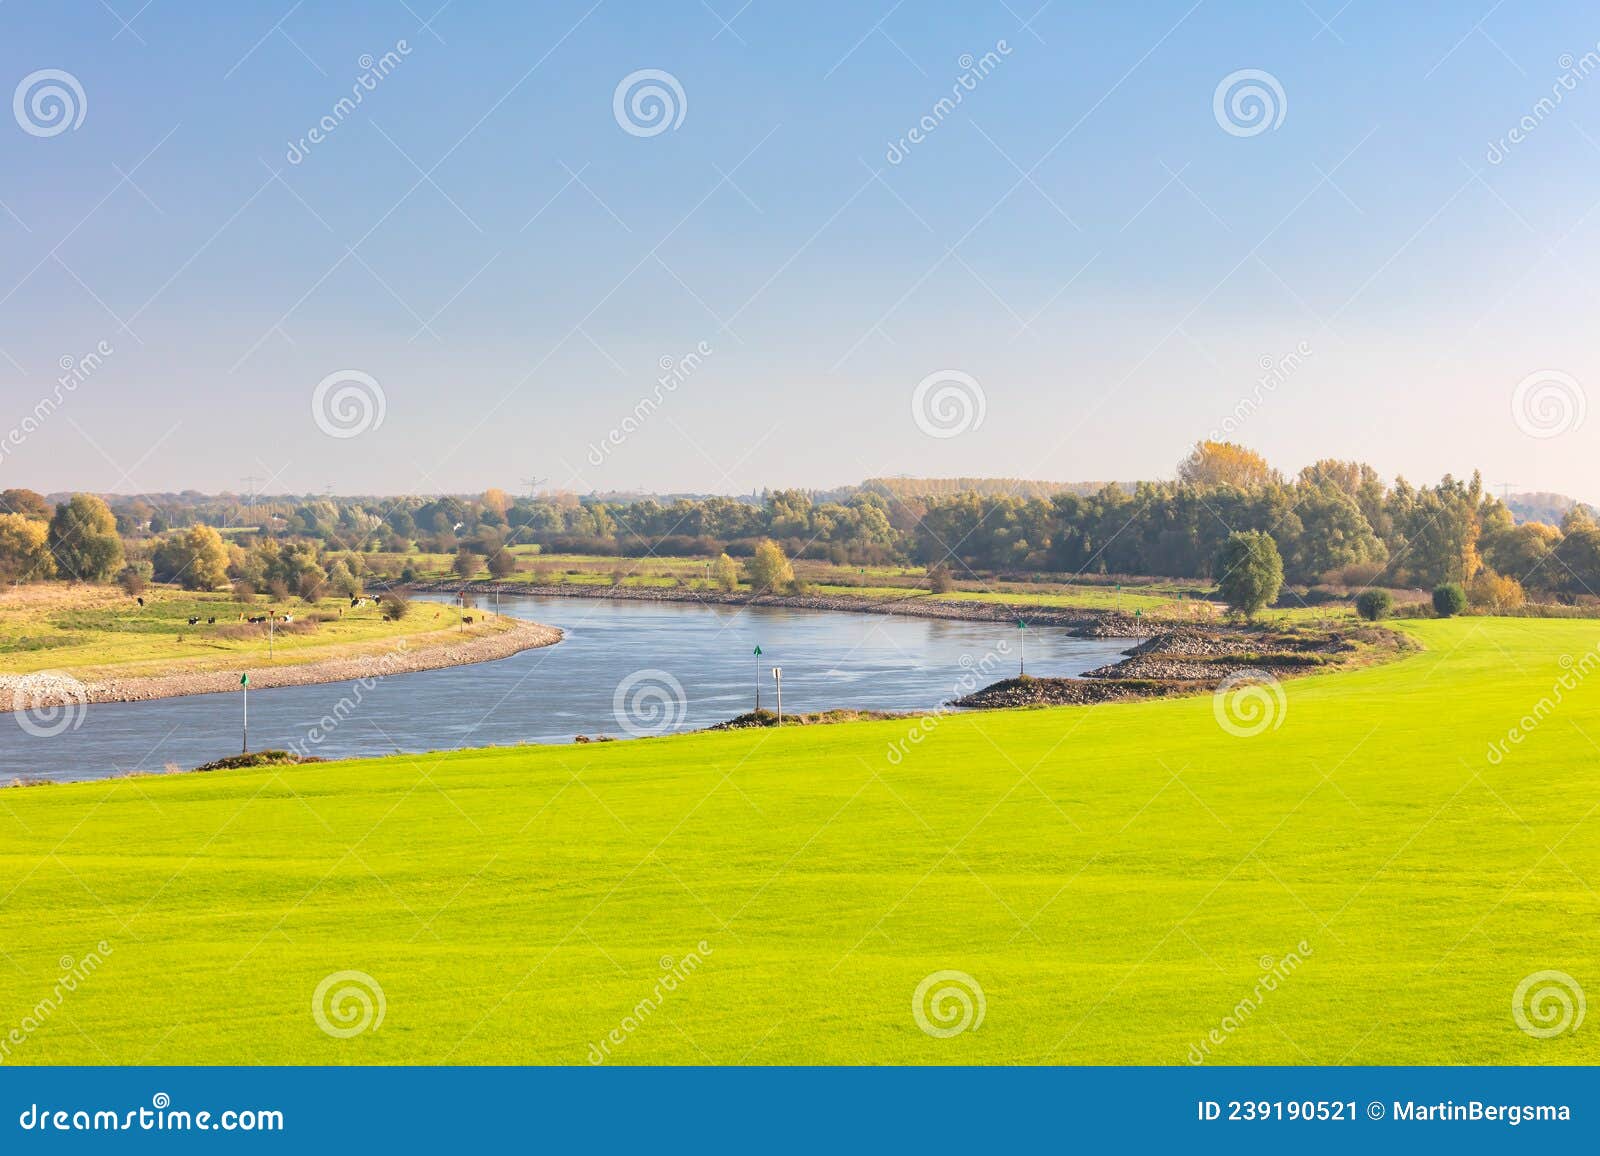 the old dutch river ijssel in the province of gelderland near the city of zutphen